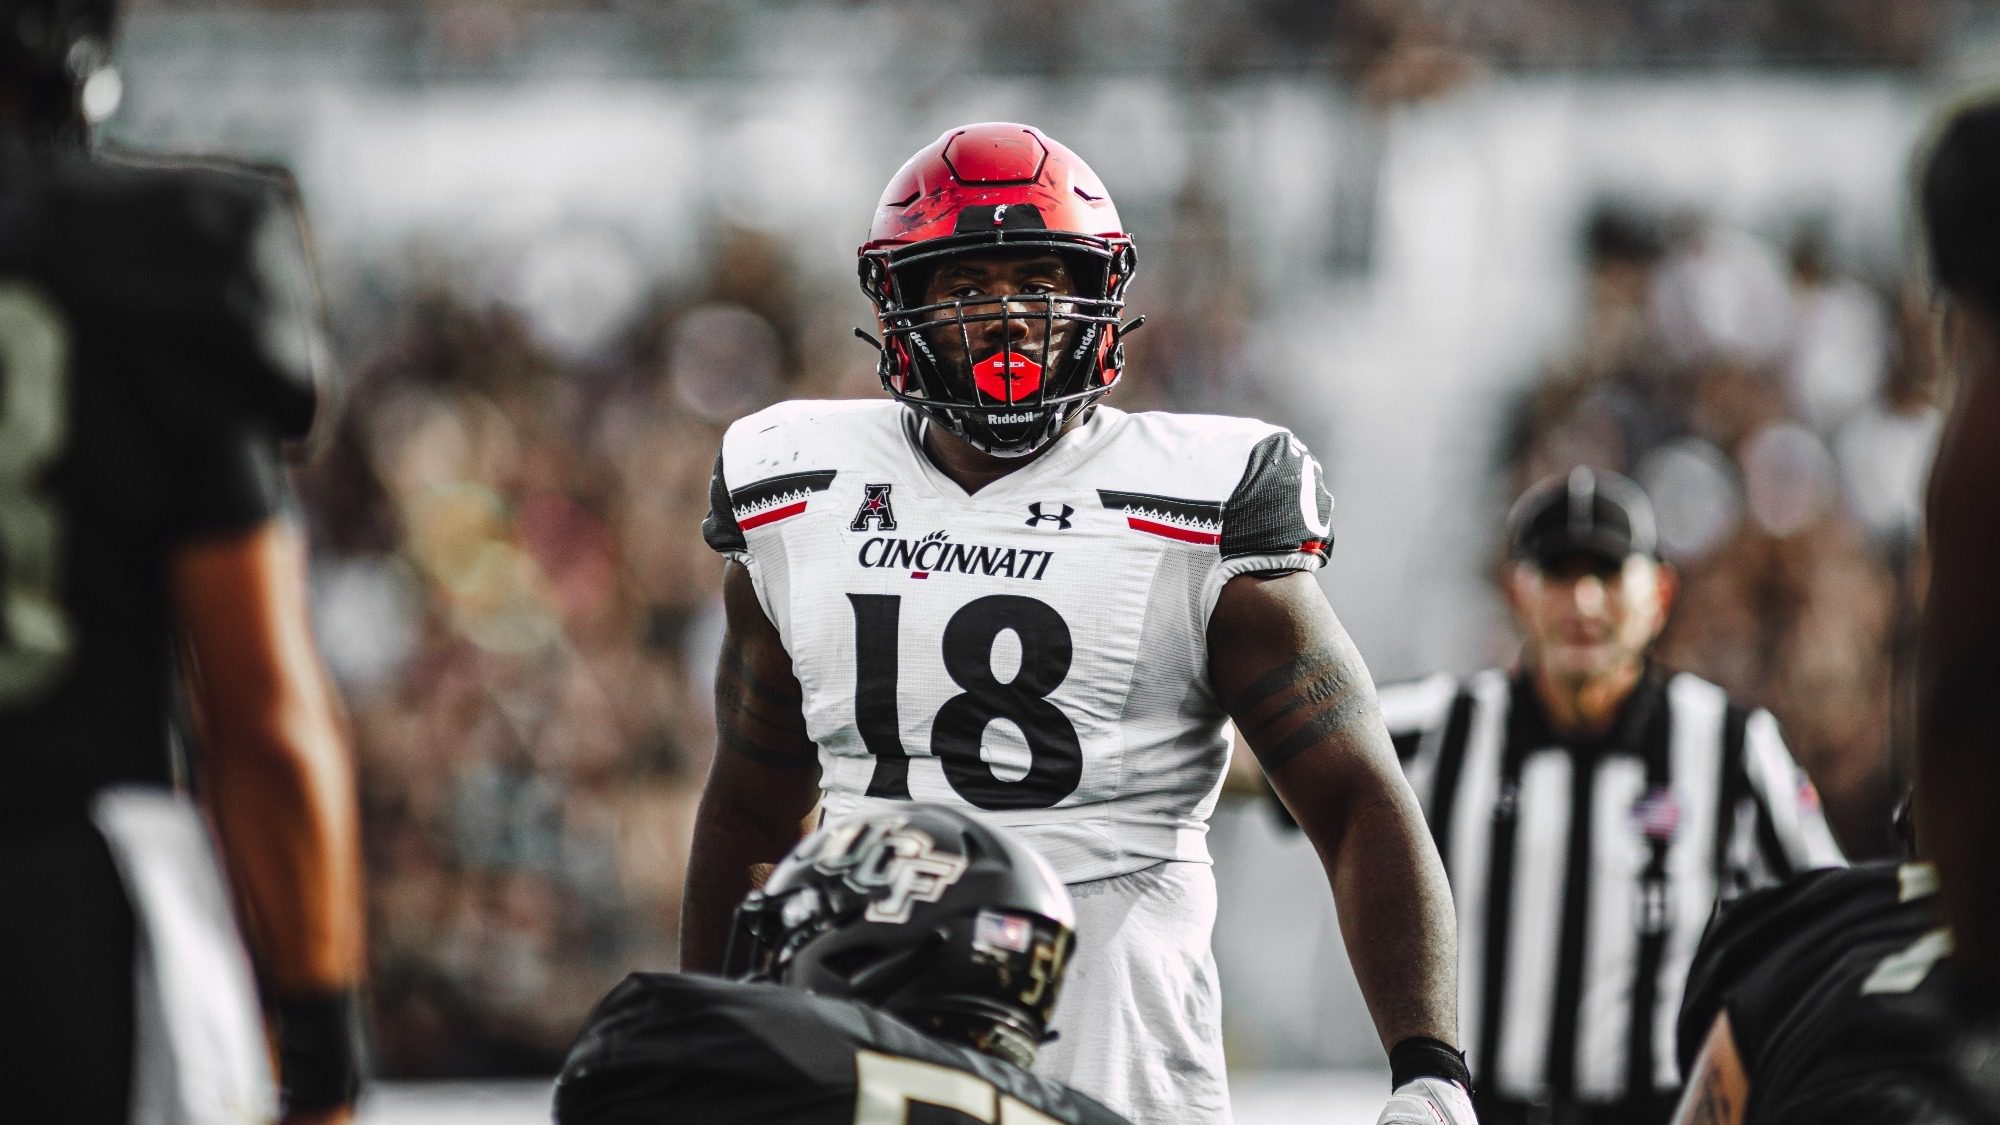 Jowon Briggs is a powerful member of the Cincinnati defensive line. He was recently named to Bruce Feldman's Freaks List. Hula Bowl scout Ian McNice breaks down Briggs as an NFL Prospect in his report.